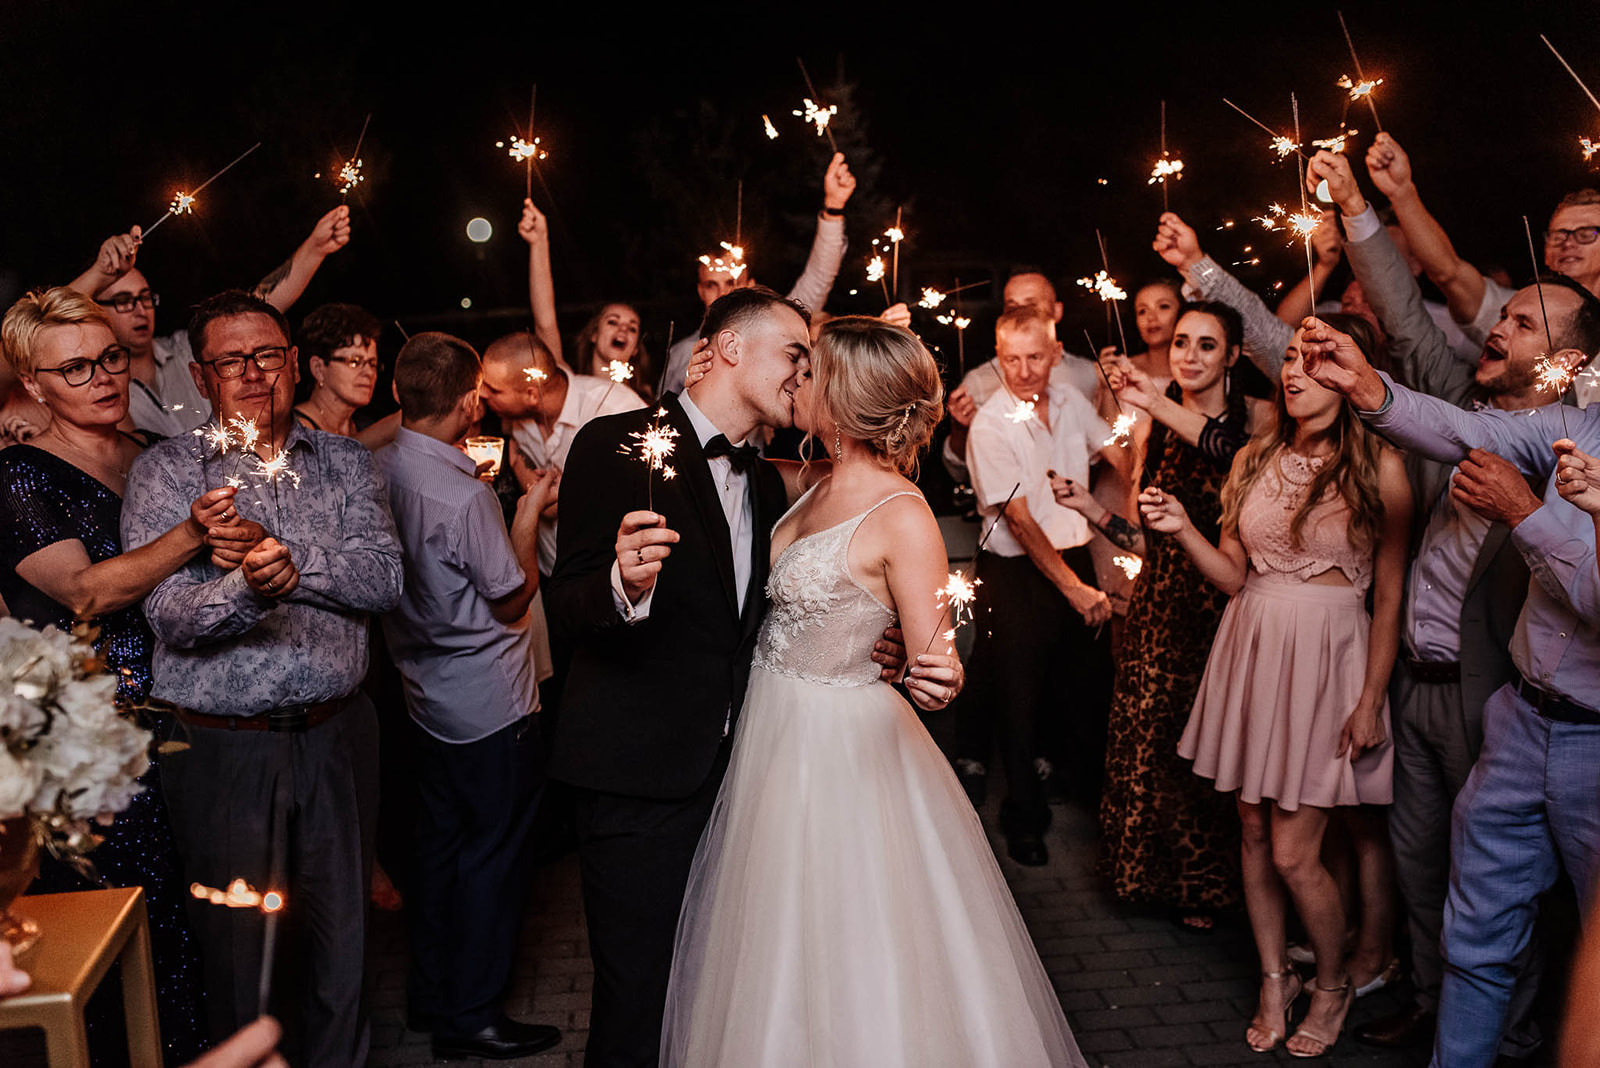 All you need to know about wedding sparklers